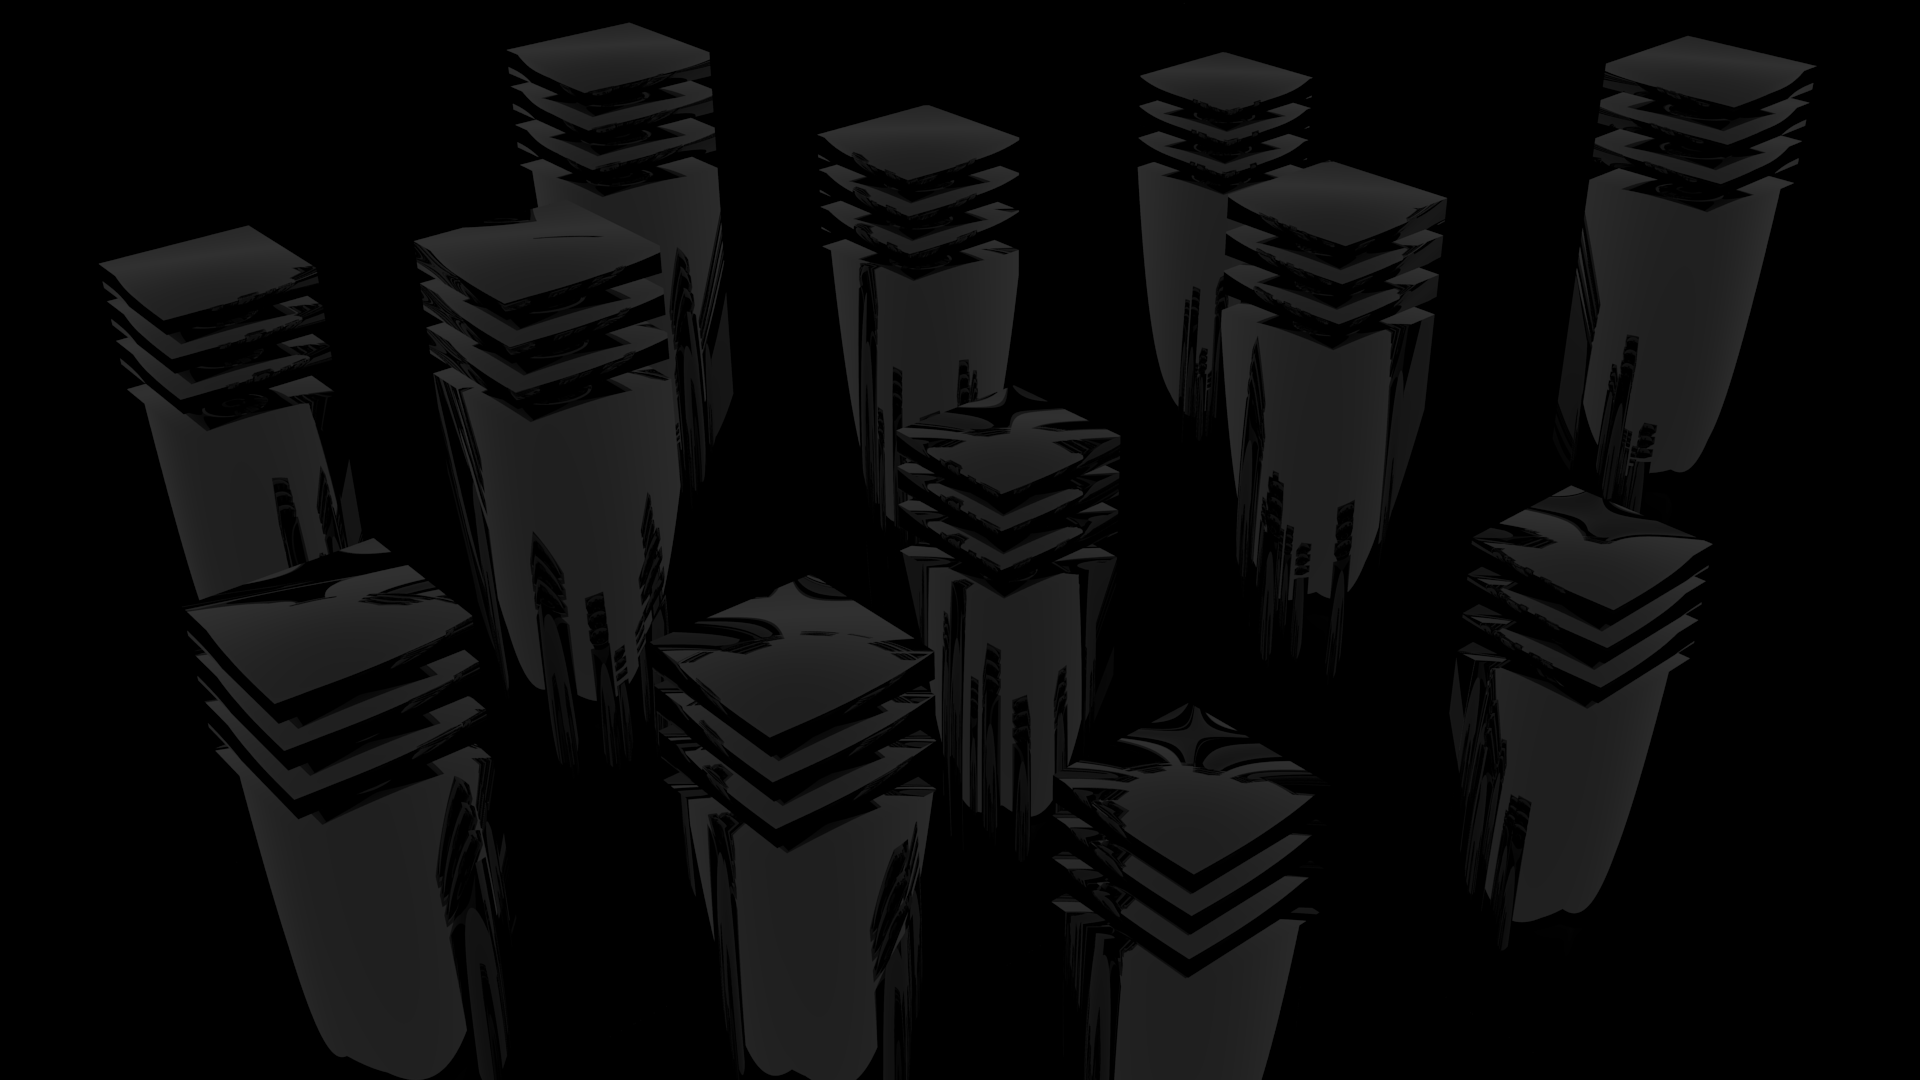 Abstract black tower artwork by SLAX.